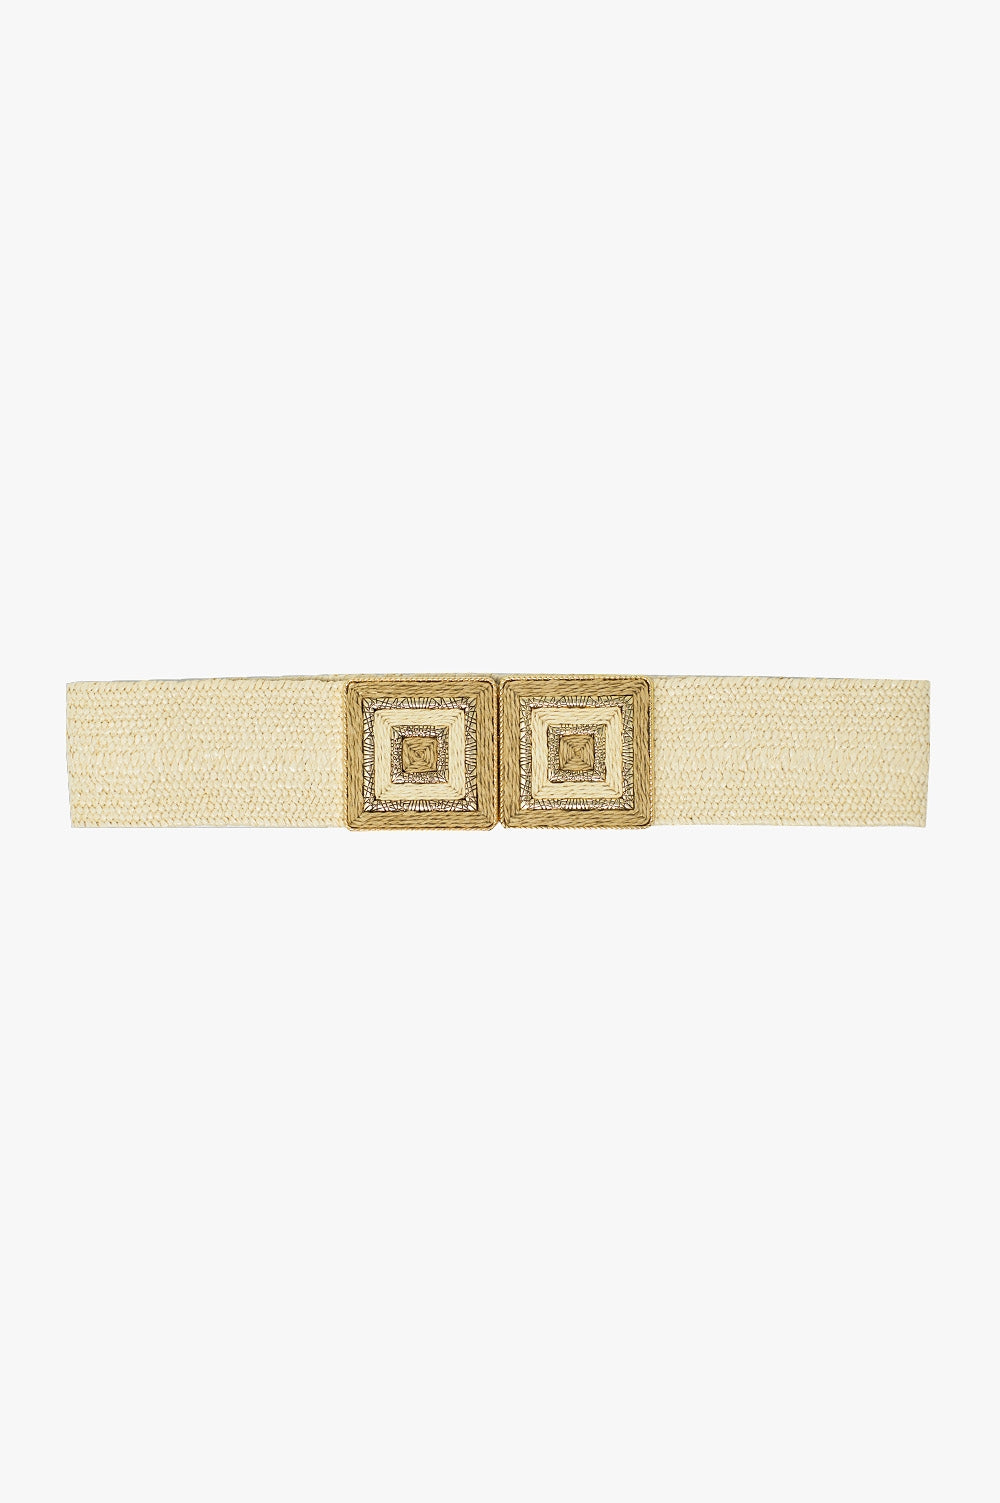 Q2 Thick beige woven belt with square buckle with gold details